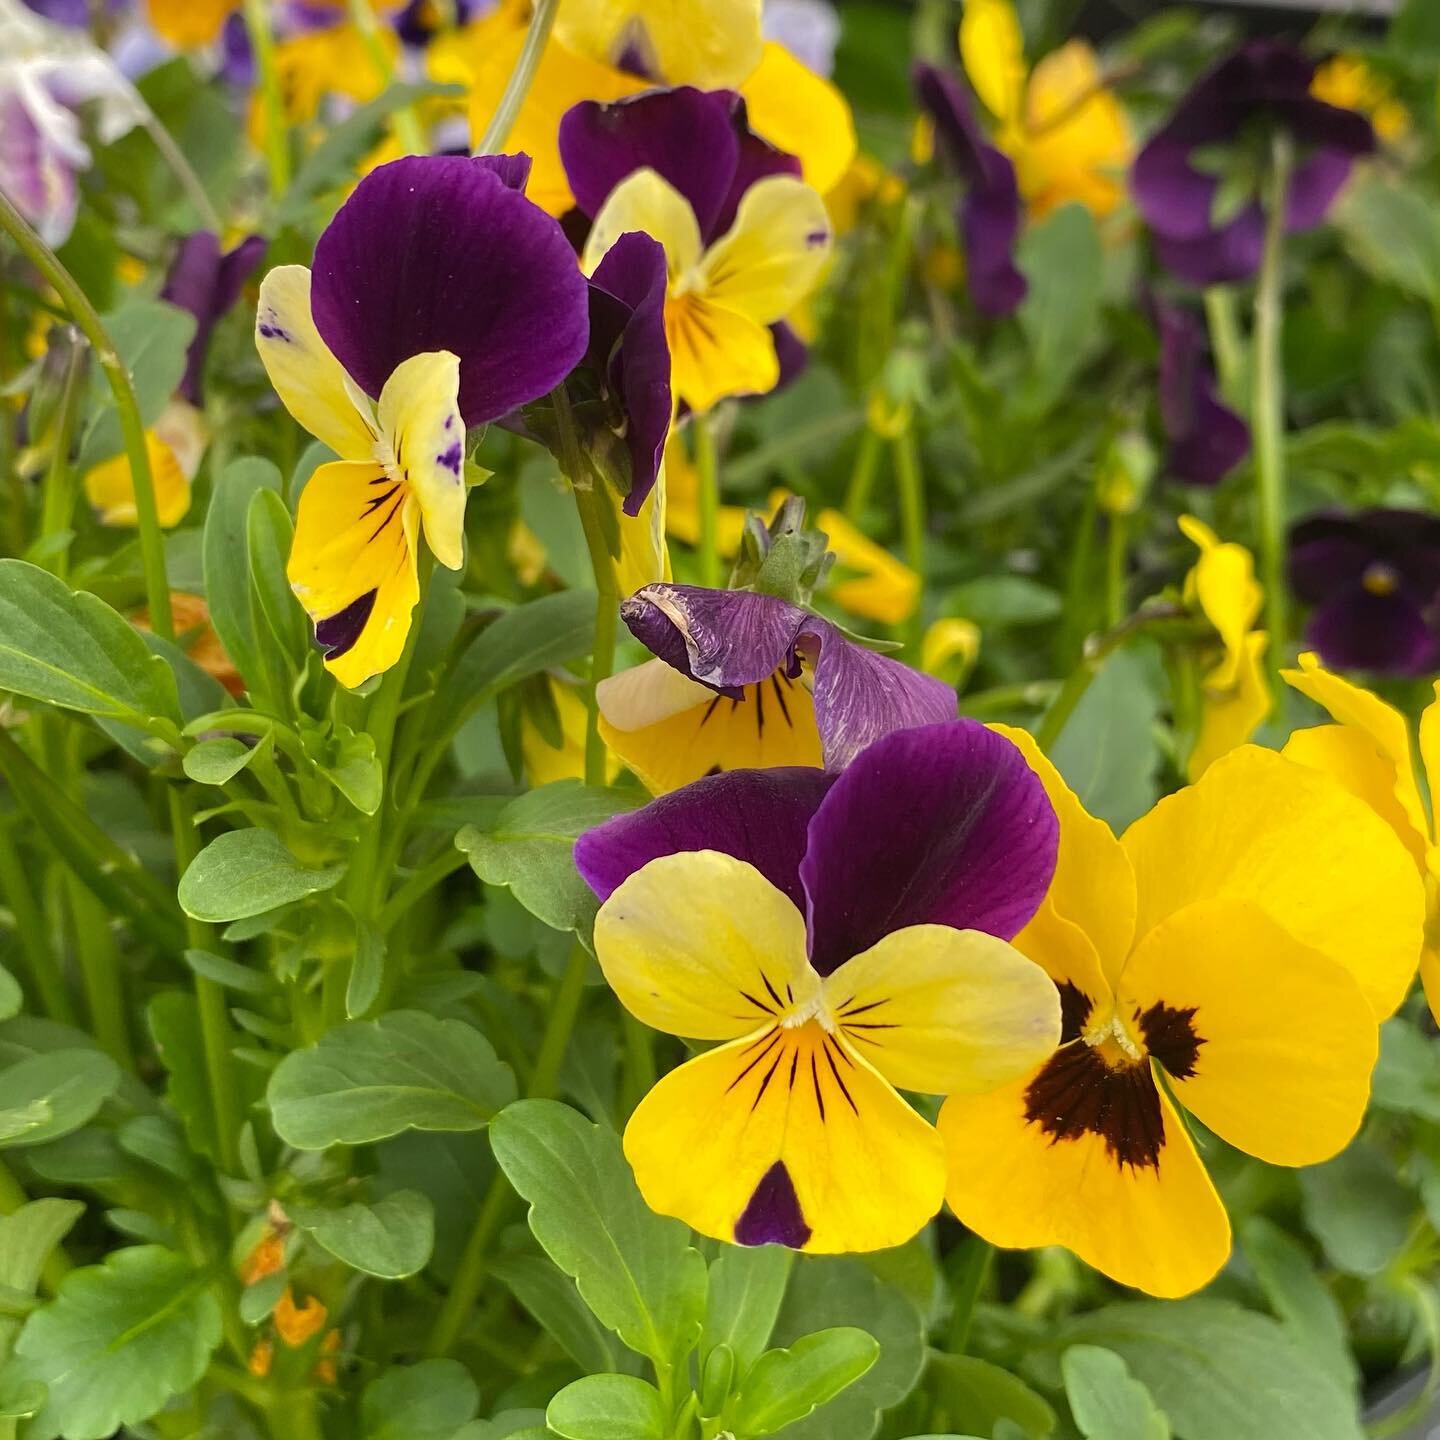 PANSY PANSY PANIES 💐💐💐

$2.99/ each or $19.99/flat (12 individuals)

#pansy #pansies #annuals #philo #ourdoorplants #perennials #summer #spring #springflowers #rareplants #plants #plantnursery #toronto #etobicoke #ontario #canada #shoplocal #local